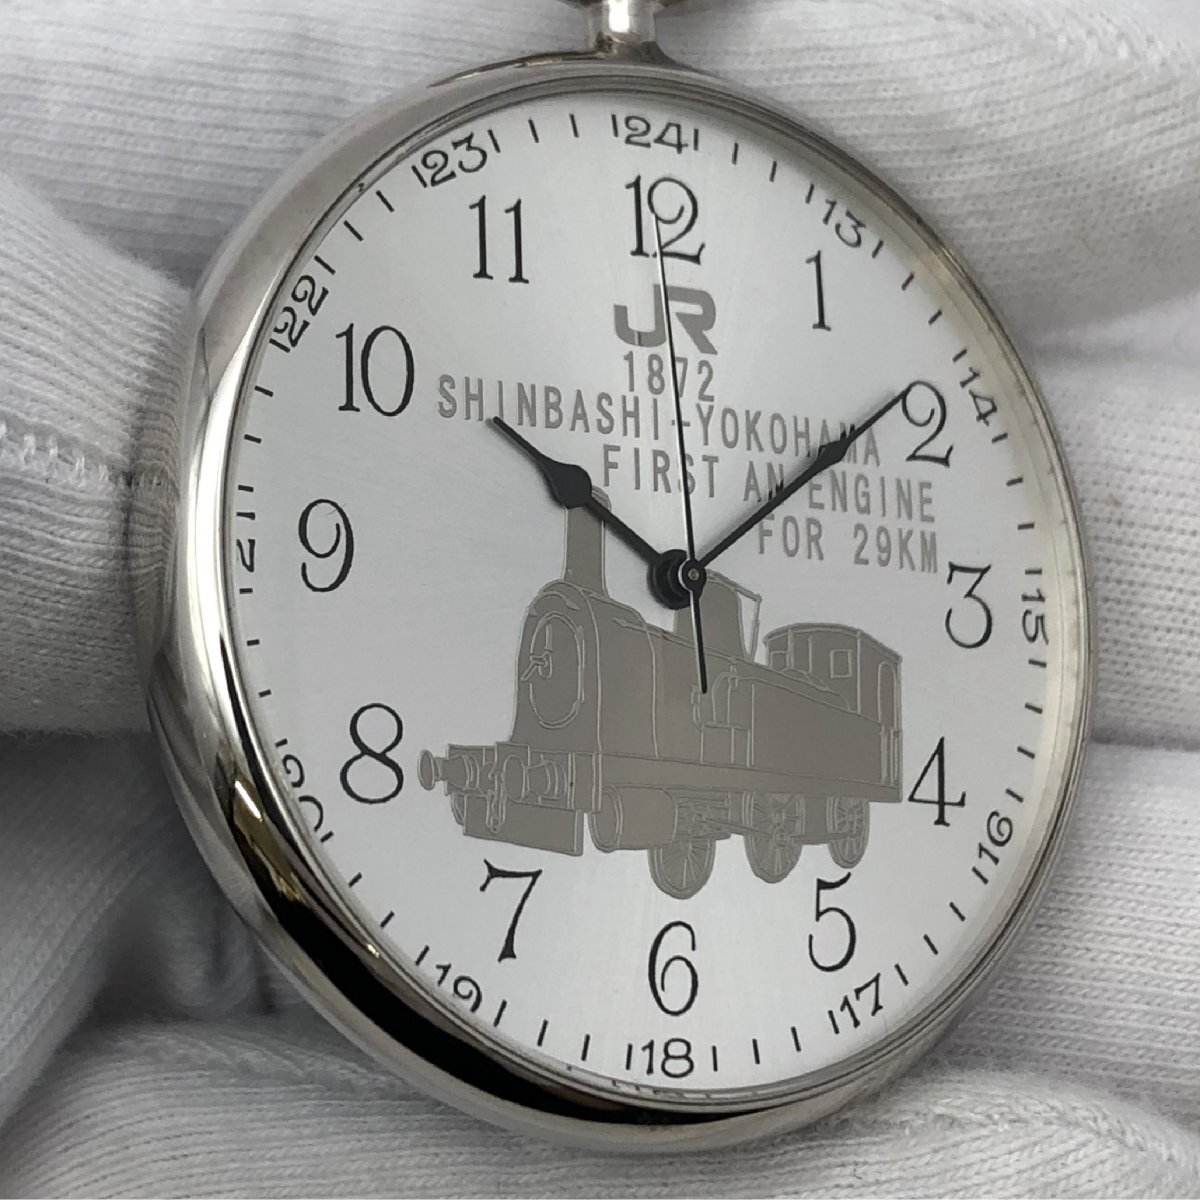 1 jpy ~/JR/ railroad opening 125 anniversary commemoration / 1902/4999 / 3 hands / silver purity /SILVER/925/ box * owner manual attaching / quartz / pocket watch / Junk /T158